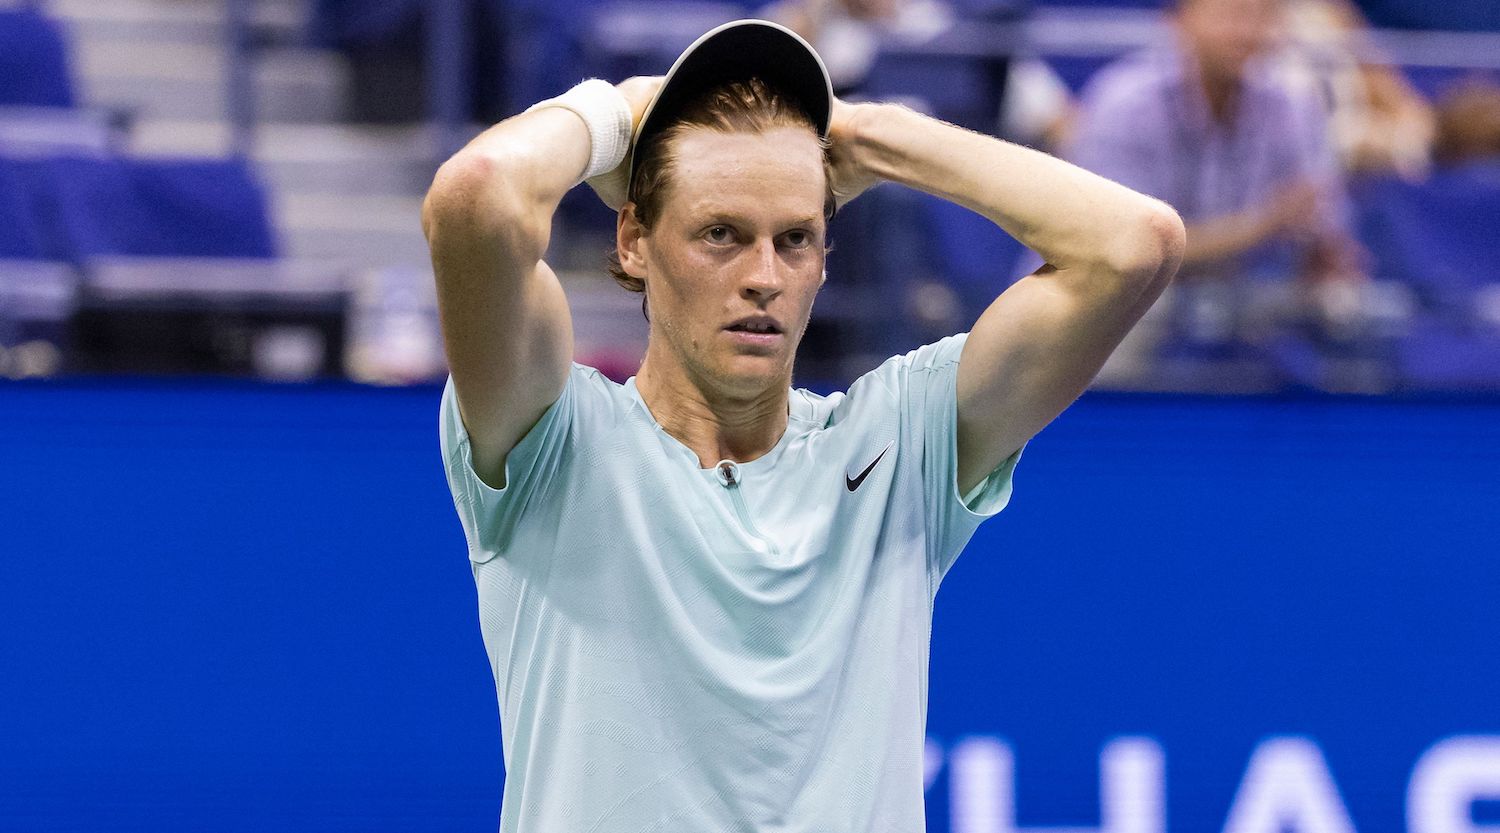 Italy's Jannik Sinner reacts during the US Open tennis tournament men's singles round of 16 match against Germany's Alexander Zverev at the USTA Billie Jean King National Tennis Center in New York City, early morning on September 5, 2023. (Photo by COREY SIPKIN / AFP) (Photo by COREY SIPKIN/AFP via Getty Images)